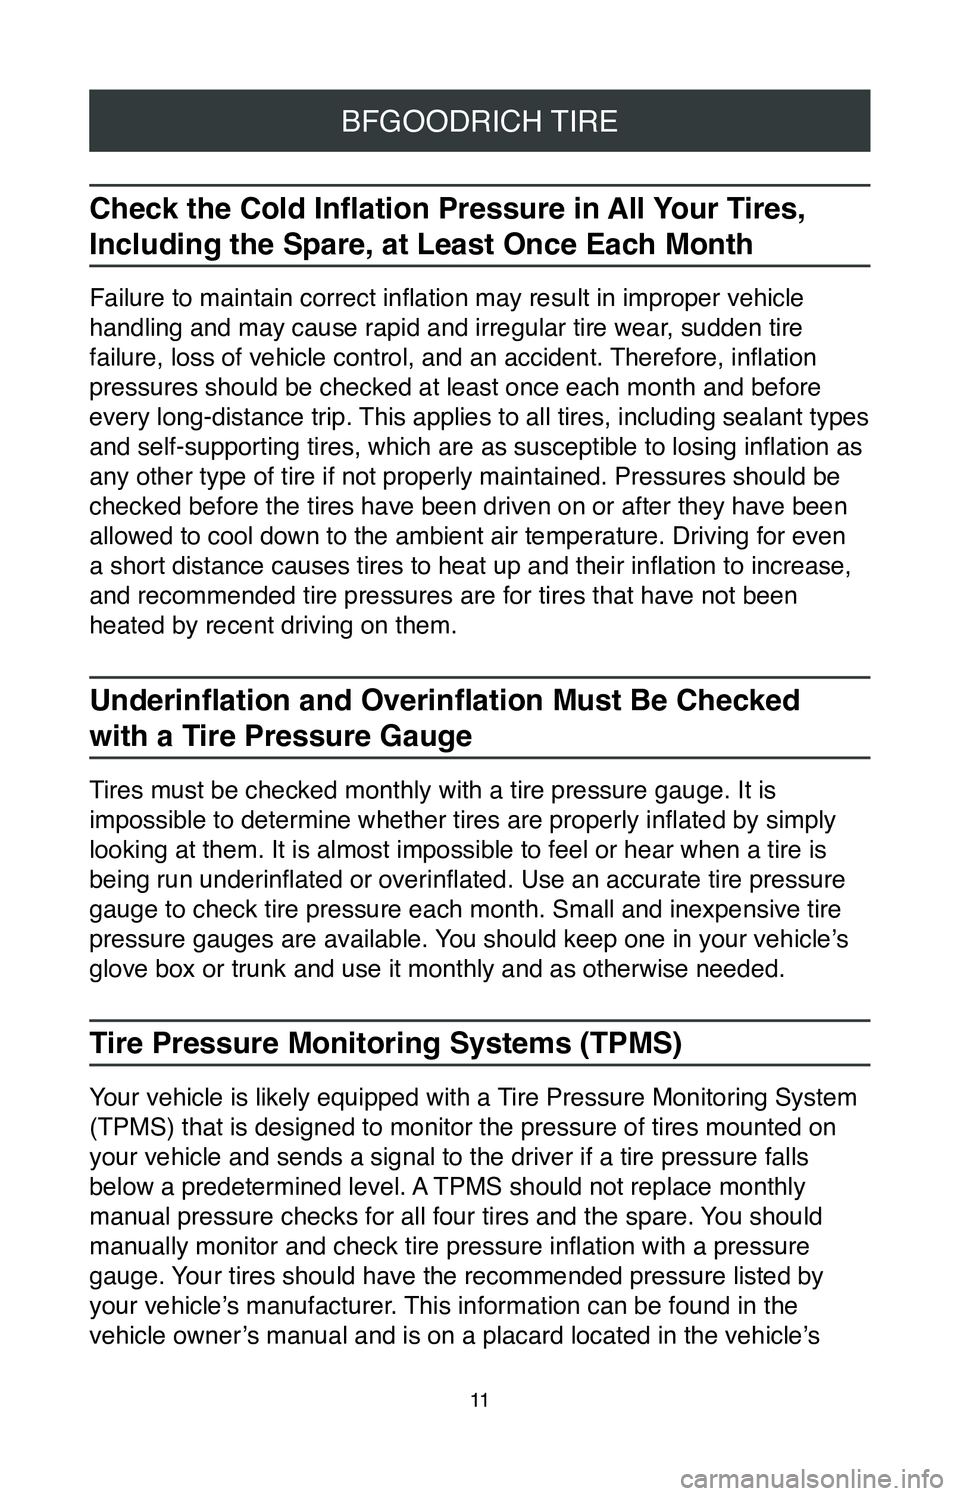 TOYOTA AVALON HYBRID 2020  Warranties & Maintenance Guides (in English) 11
BFGOODRICH TIRE
Check the Cold Inflation Pressure in All Your Tires, 
Including the Spare, at Least Once Each Month
Failure to maintain correct inflation may result in improper vehicle 
handling an